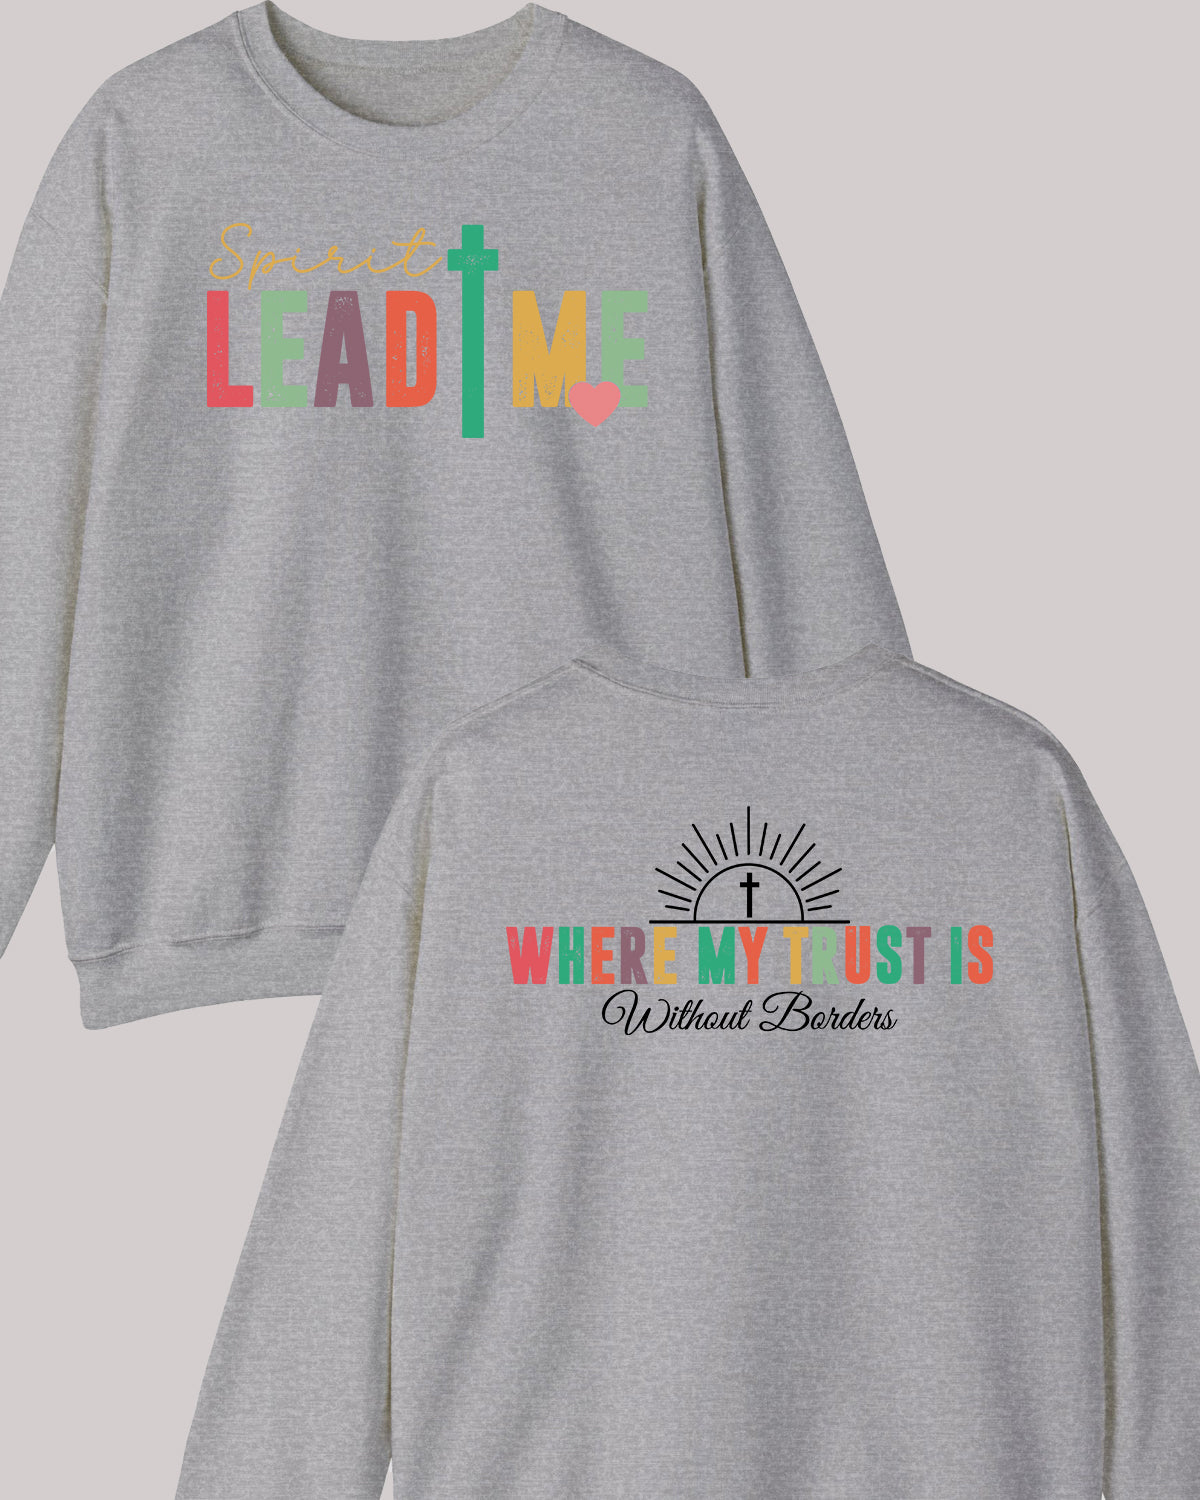 Spirit Lead Me Where My Trust Is Without Borders Front Back Sweatshirt